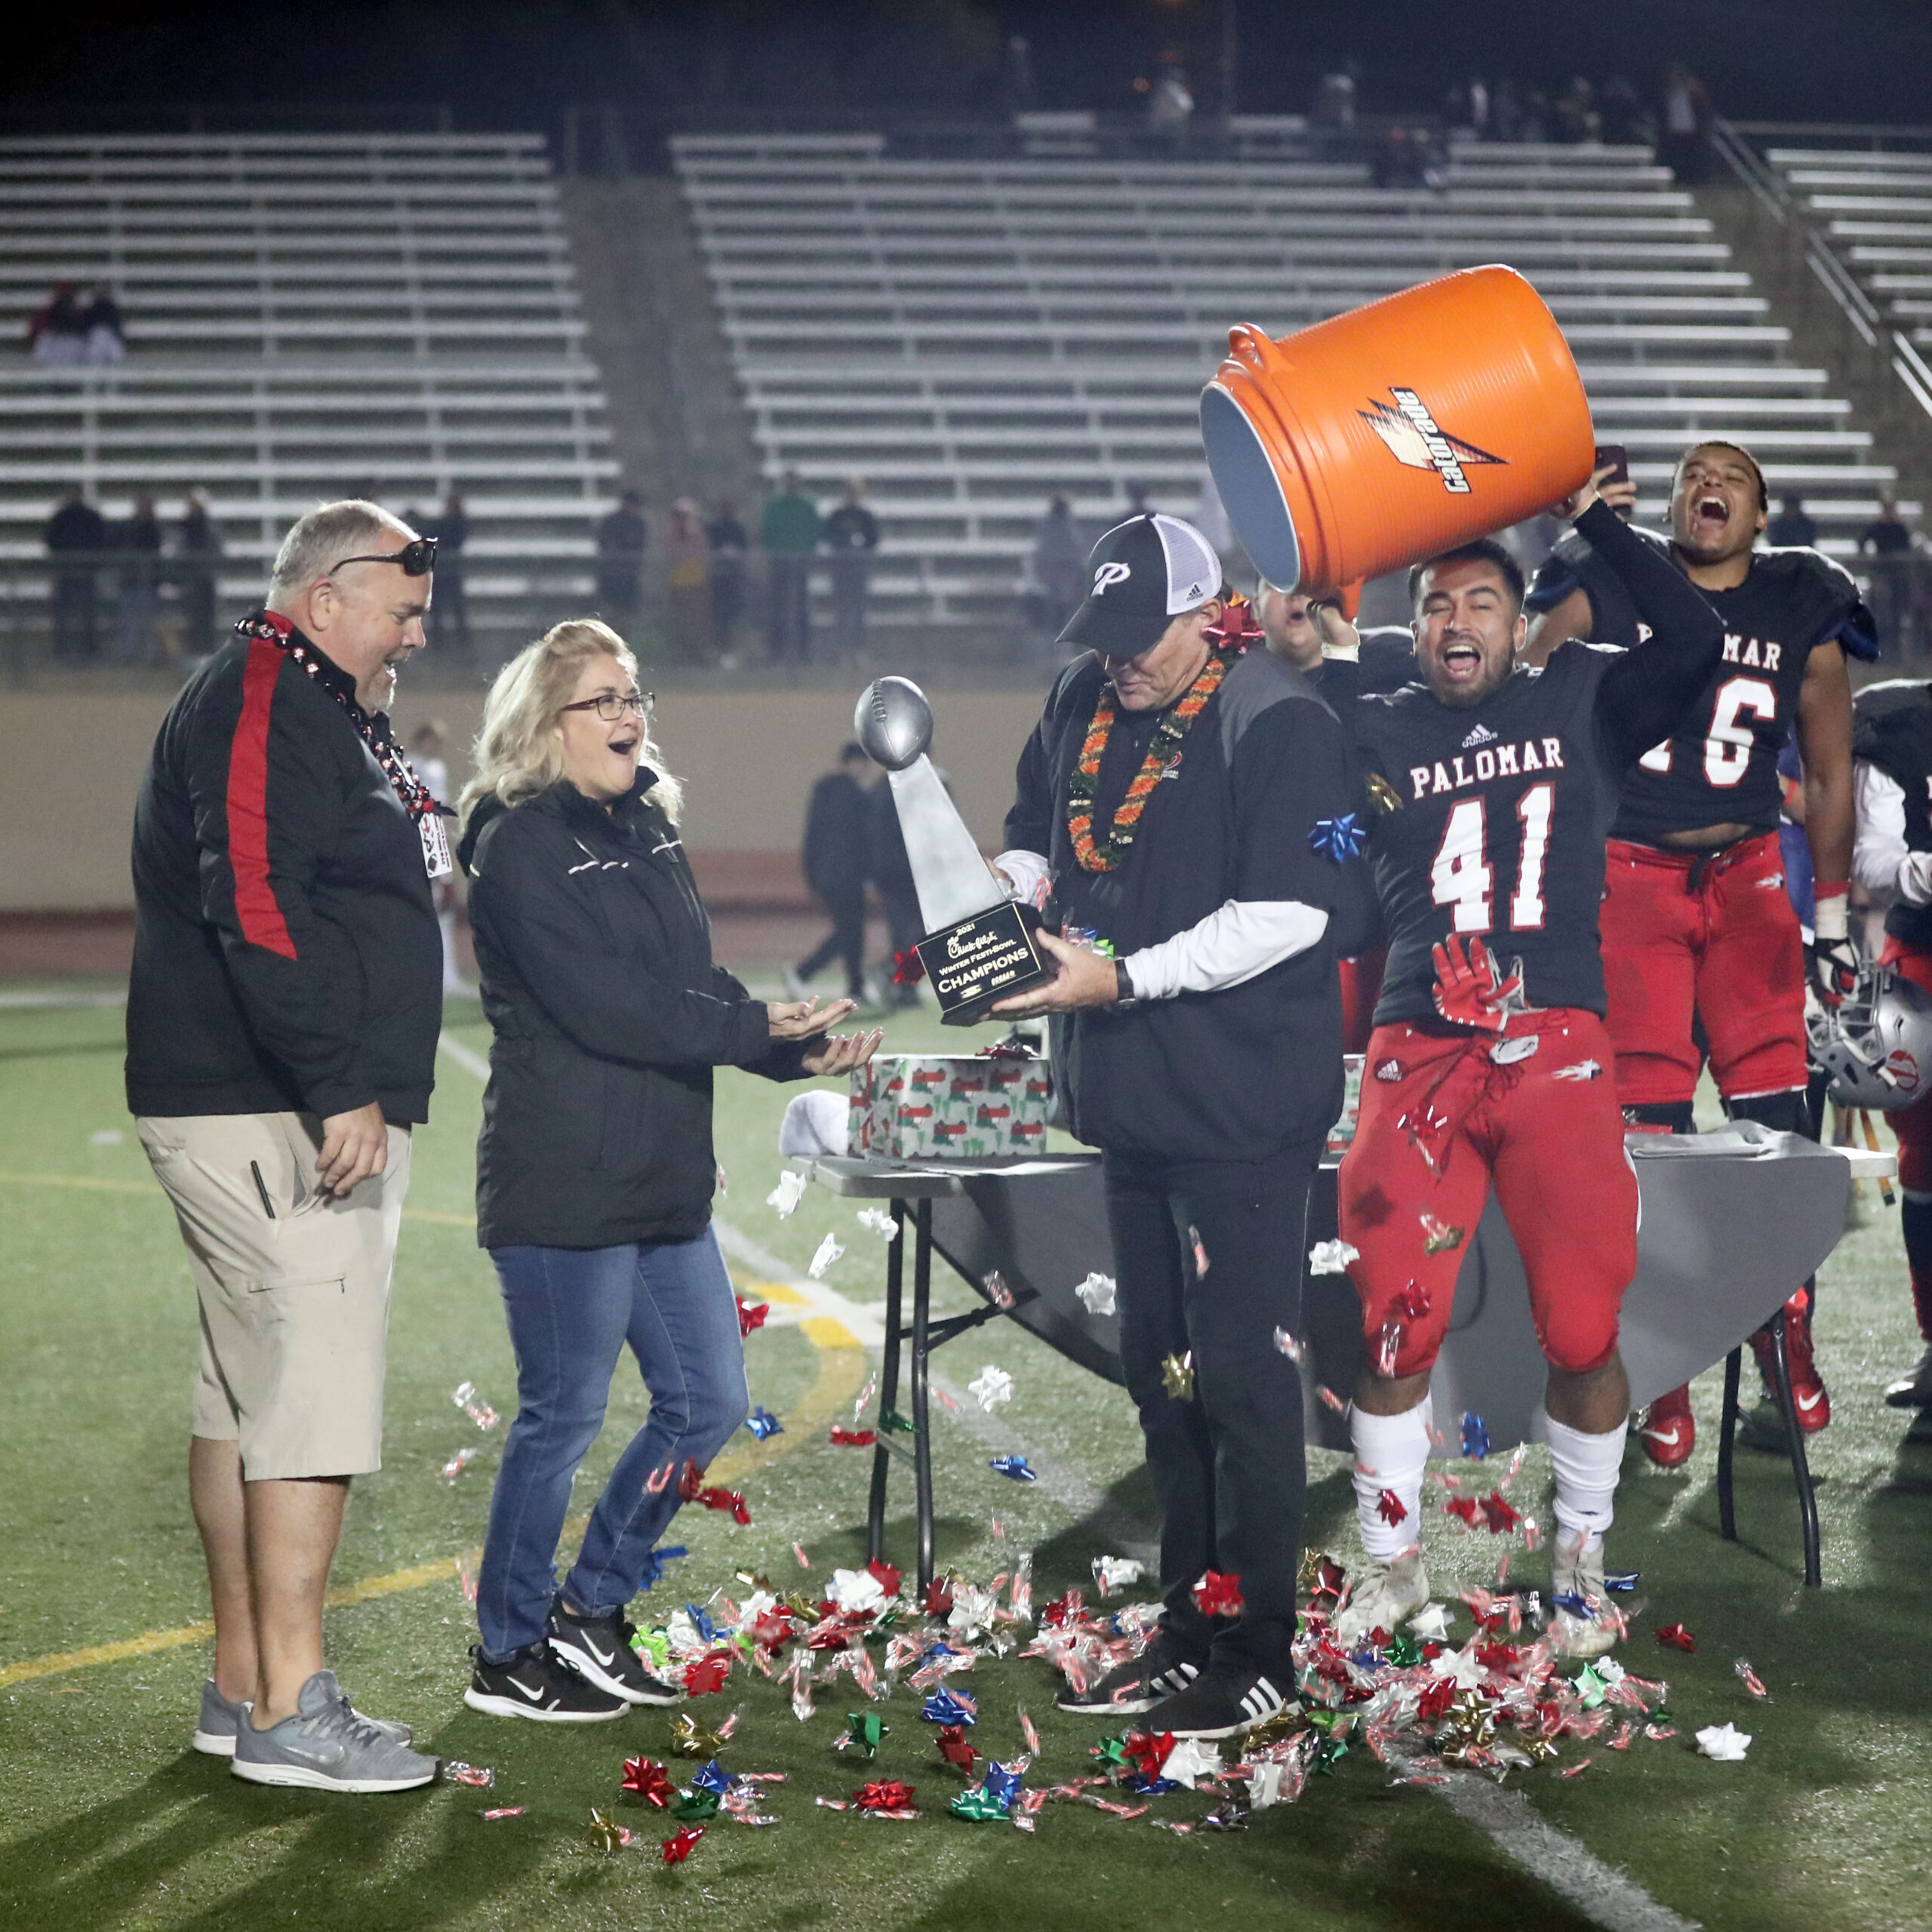 A football coach holds a trophy as a football player dumps ribbons and candy from a large Gatorade bin. Several people around them laugh.